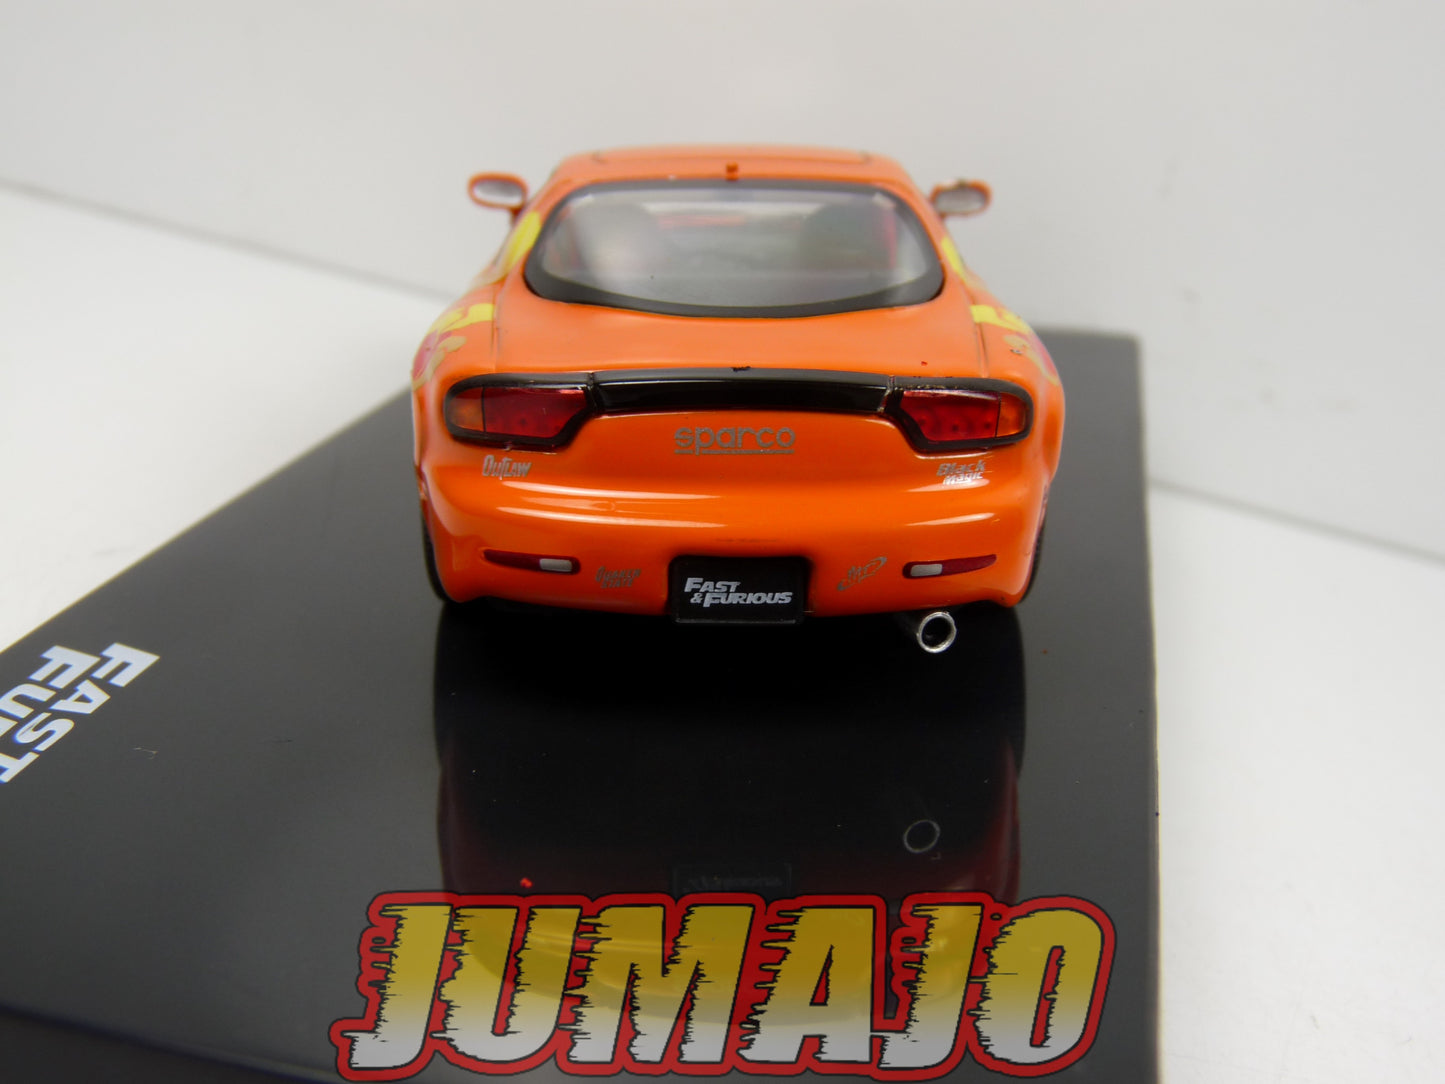 FF31 Voiture 1/43 IXO altaya Fast and Furious : Mazda RX-7 FD